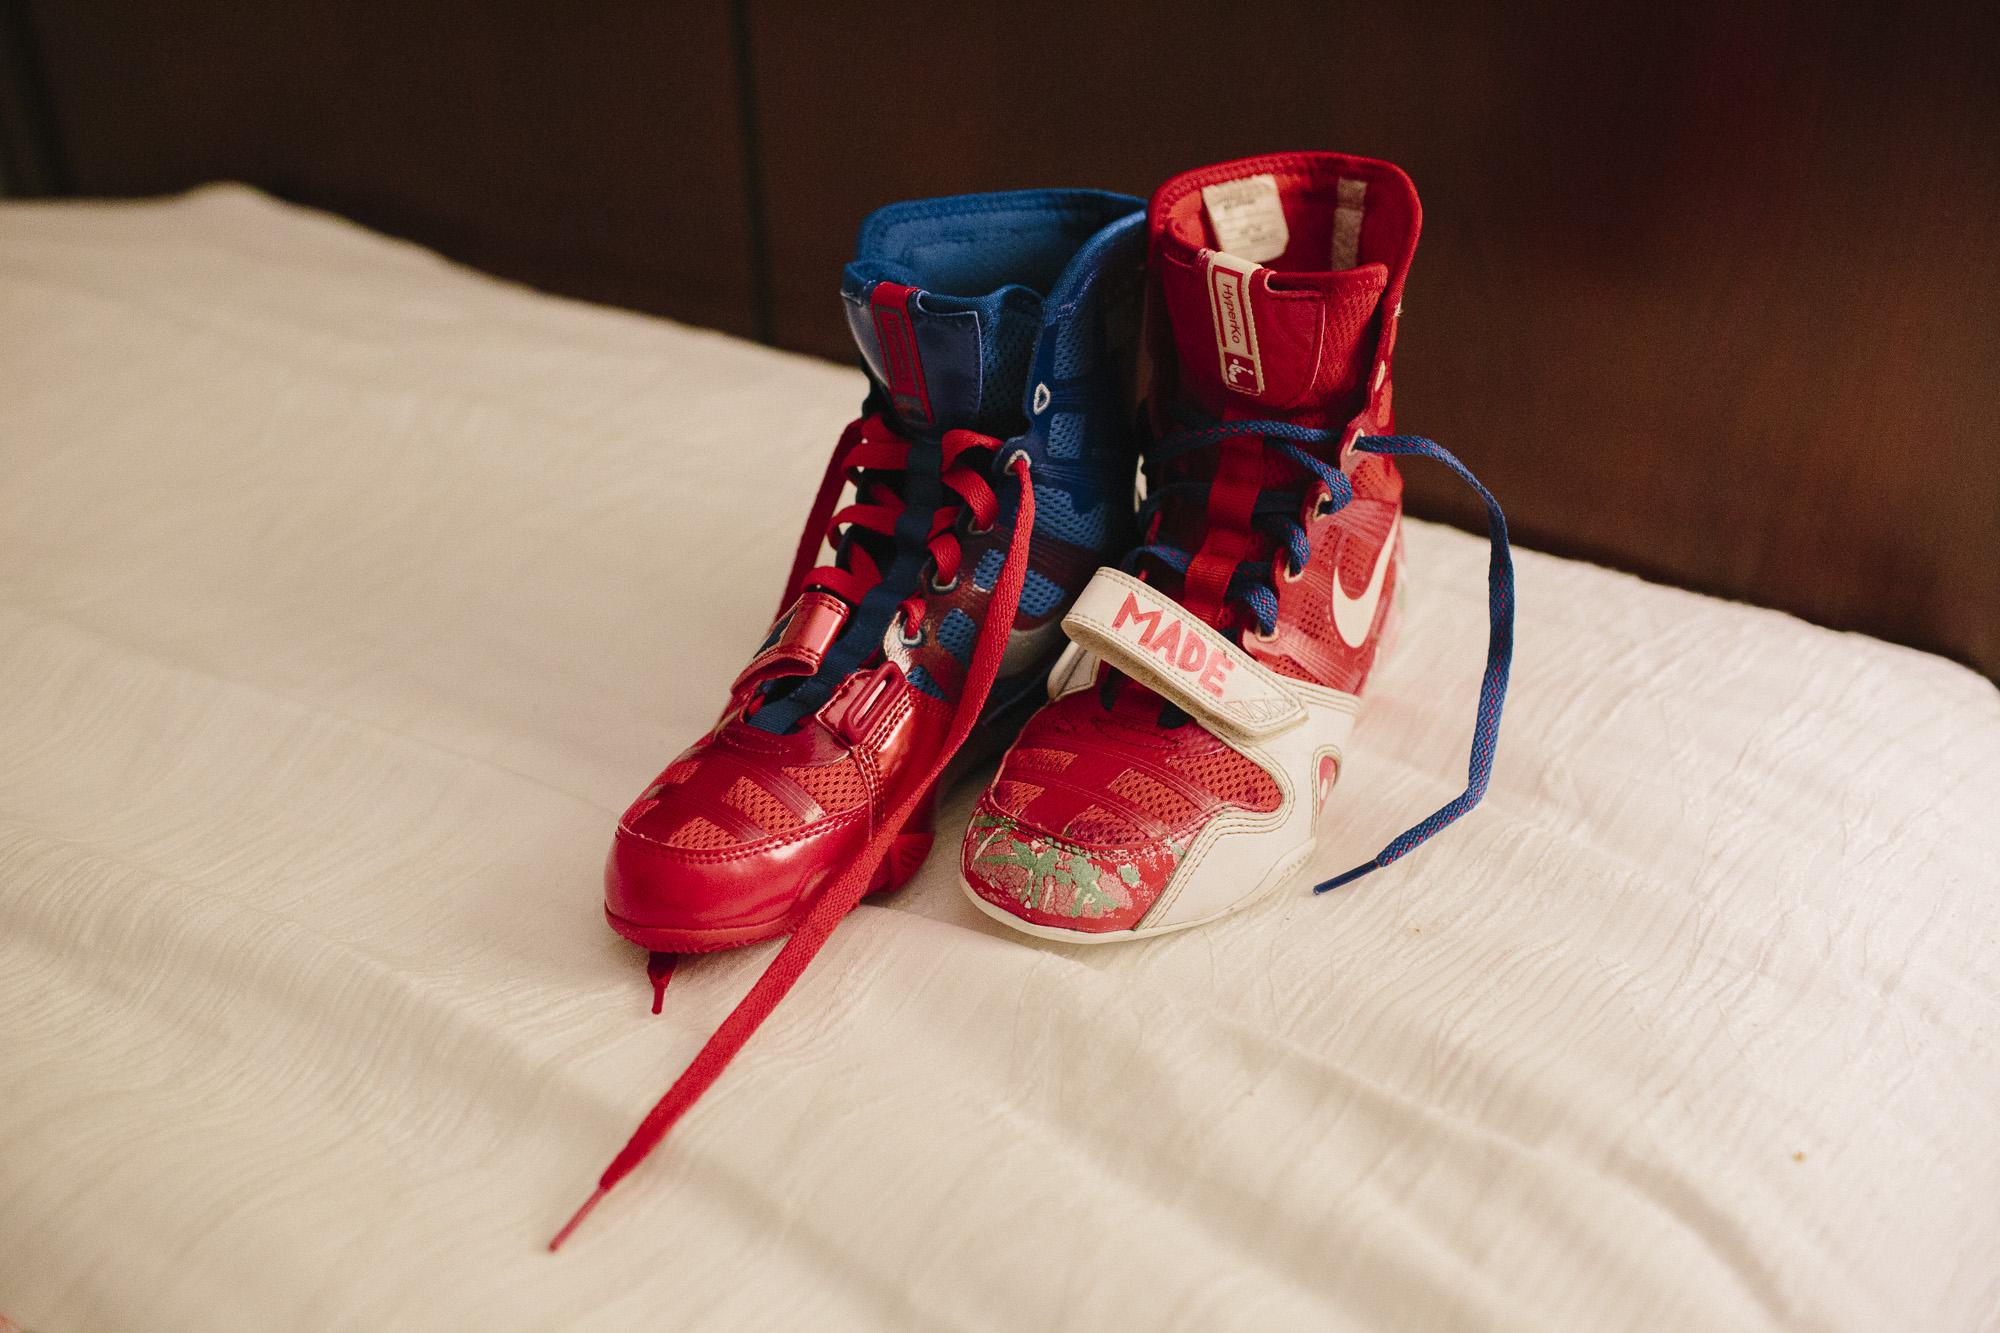 Pound for Pound | ESPN W - Shelly Vincent's boxing shoes are placed on her bed...